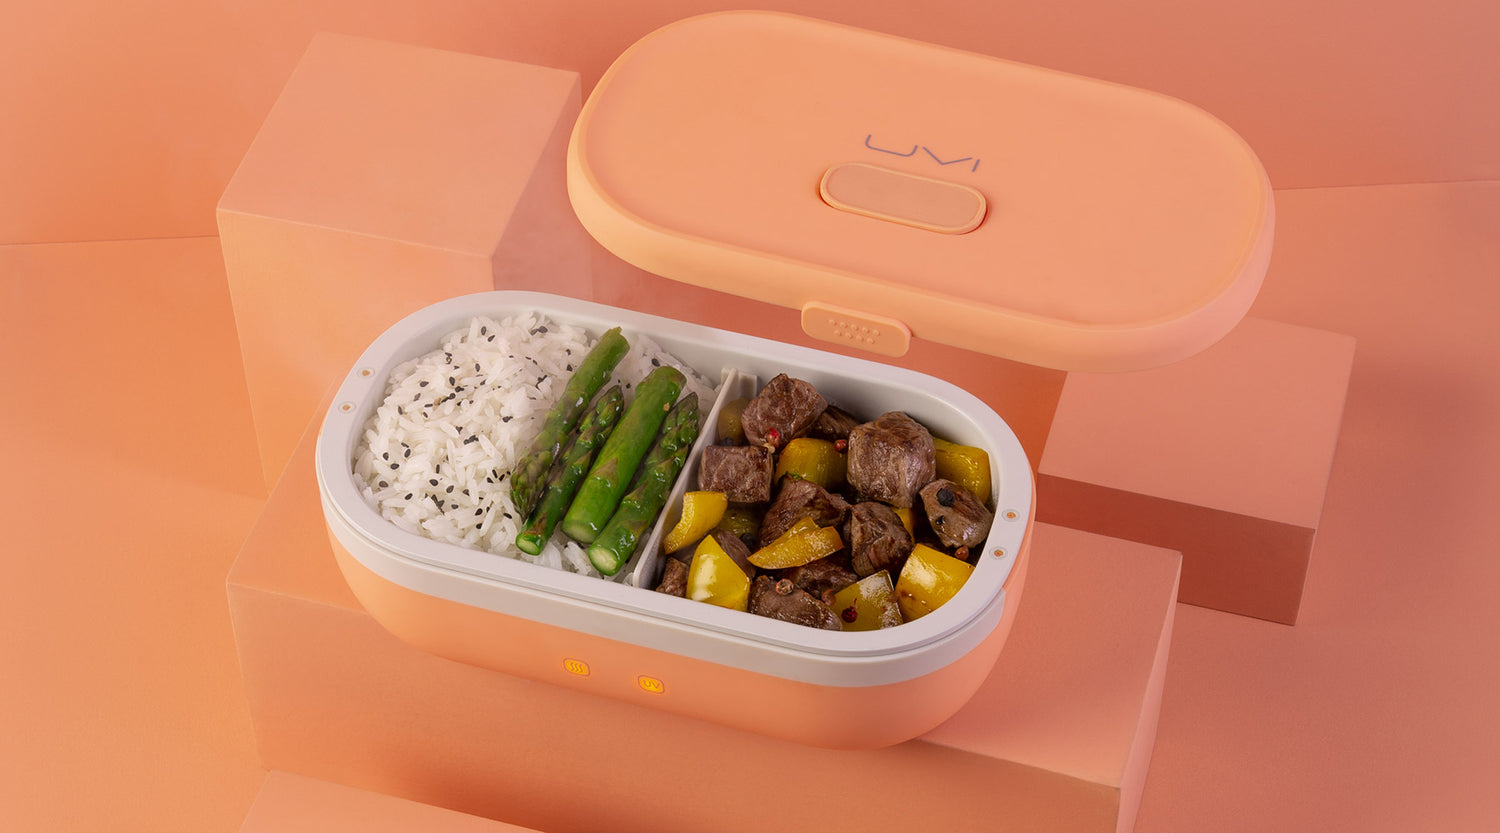 UVI -  Self Heating & Cleaning Lunchbox with UV light